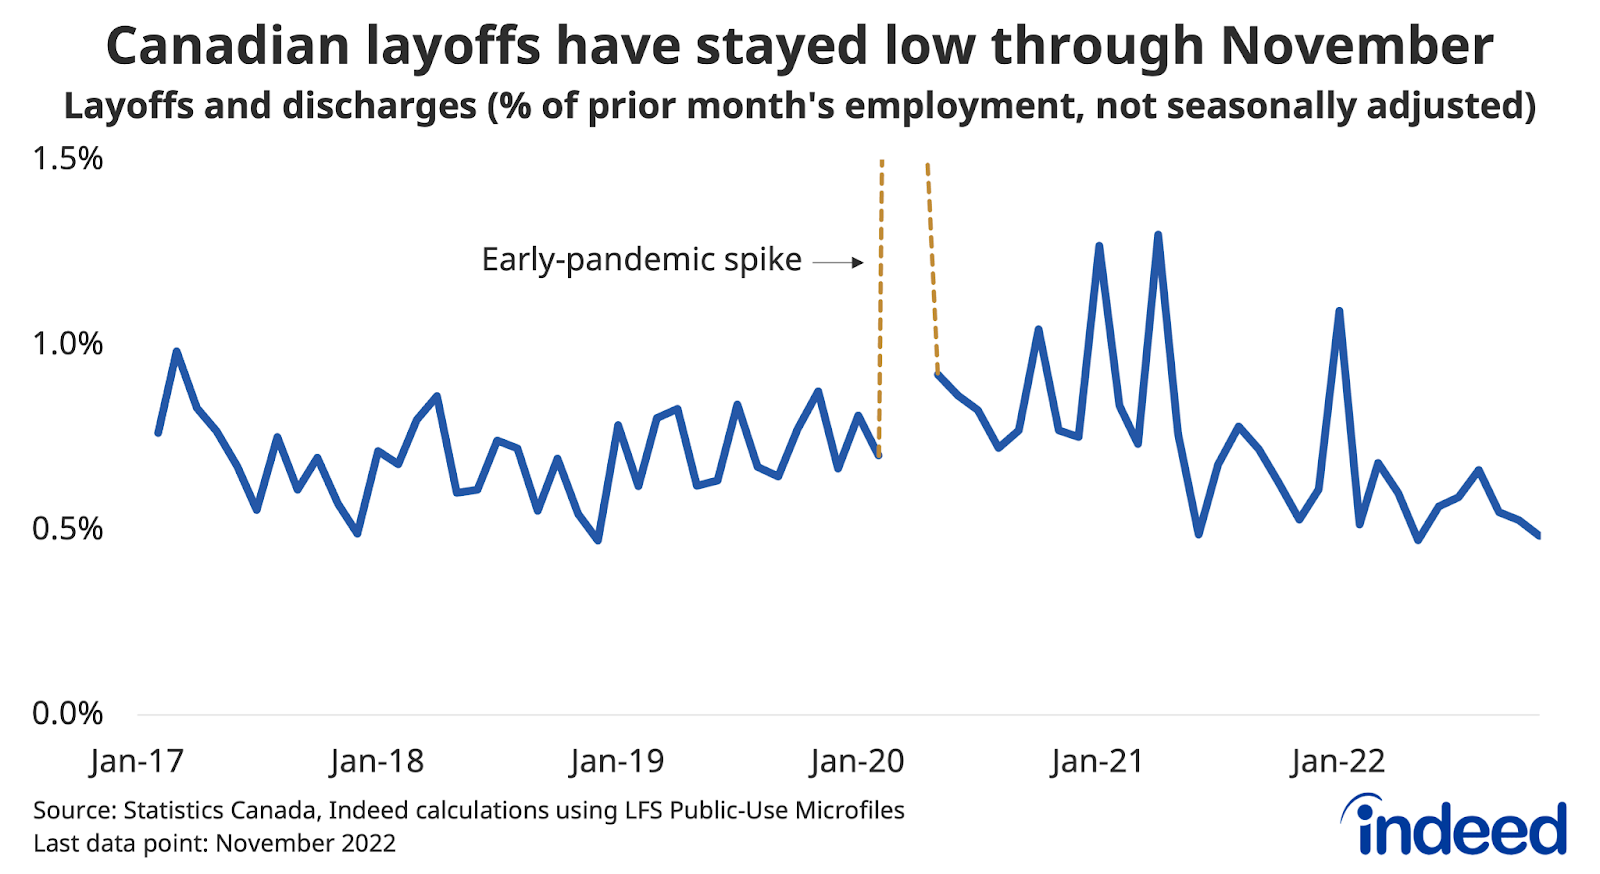 A line chart entitled “Canadian layoffs have stayed low through November” shows monthly layoffs and discharges as a per cent of the prior months’ employment between February 2017 and November 2022. The layoff rate over the past three months averaged 0.52%, lower than rates seen over the same period in previous years. 